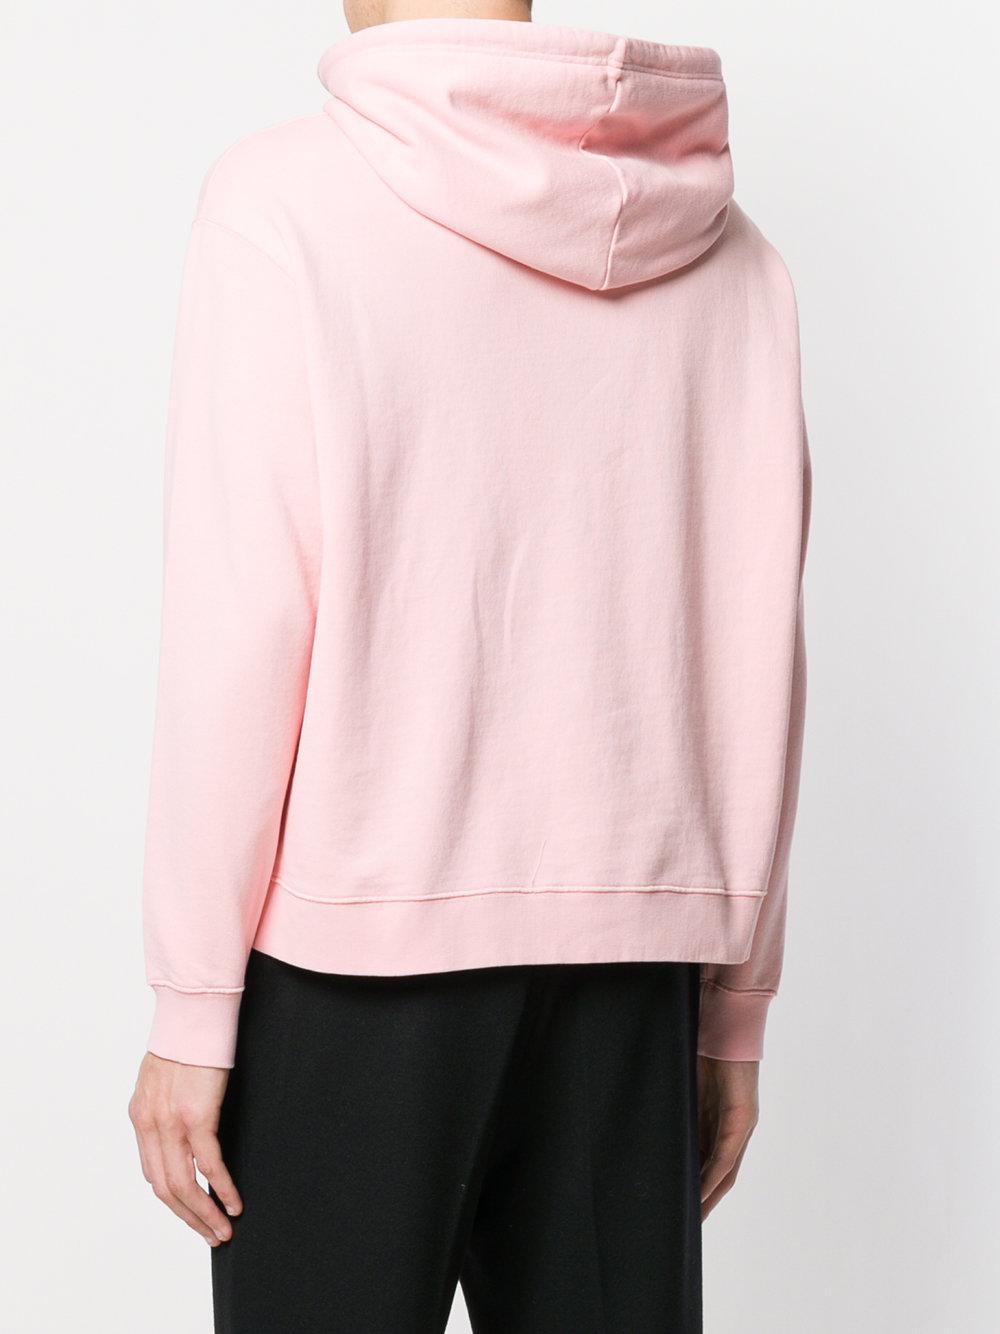 Lyst - House Of Holland Photo Print Hoodie in Pink for Men